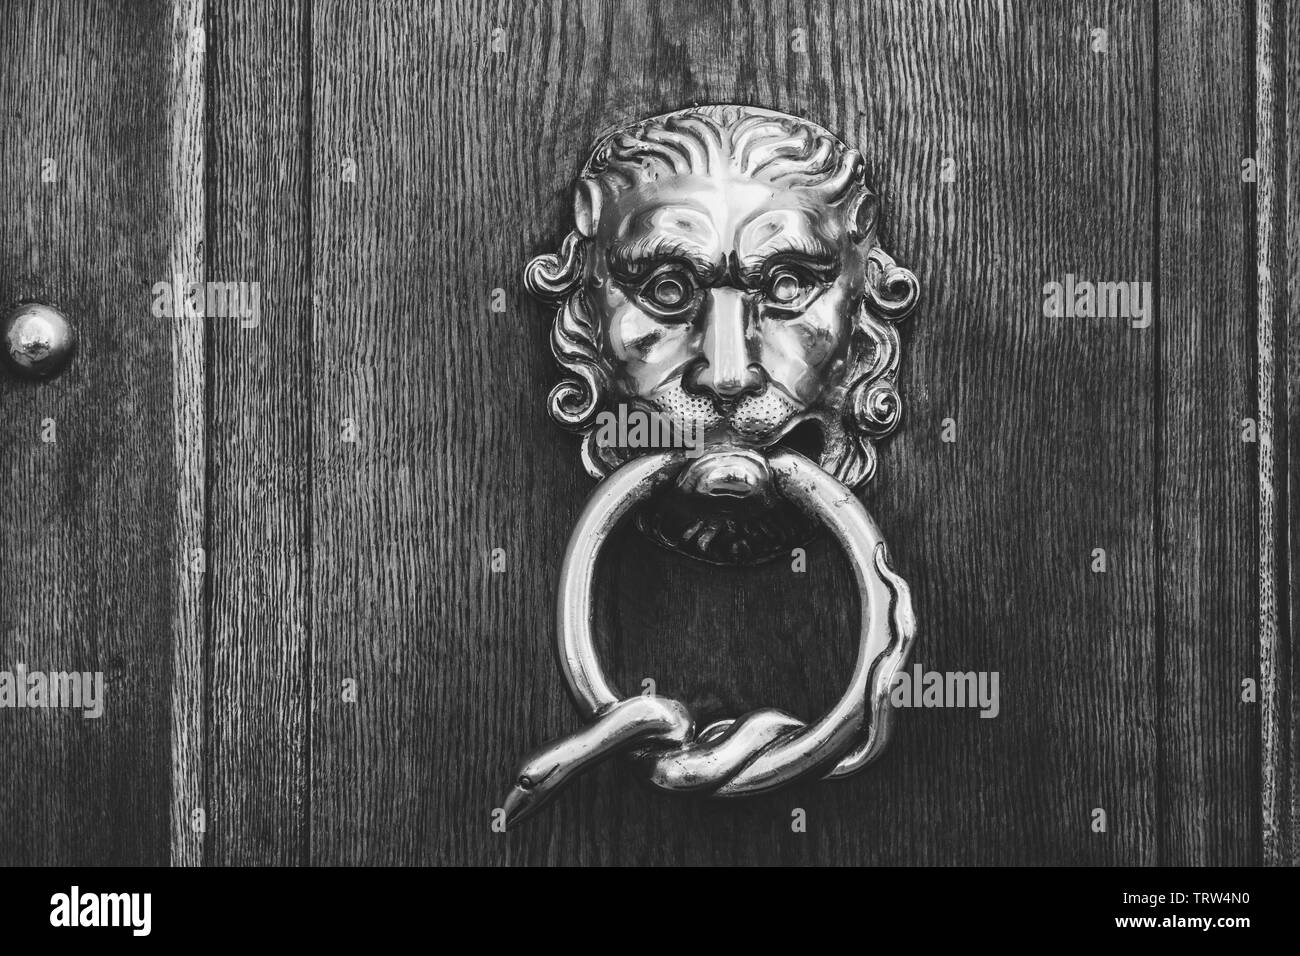 Close-up of a shiny metal lion head with a wound up snake in its mouth on a rustic wooden door - black and white, slightly faded look Stock Photo